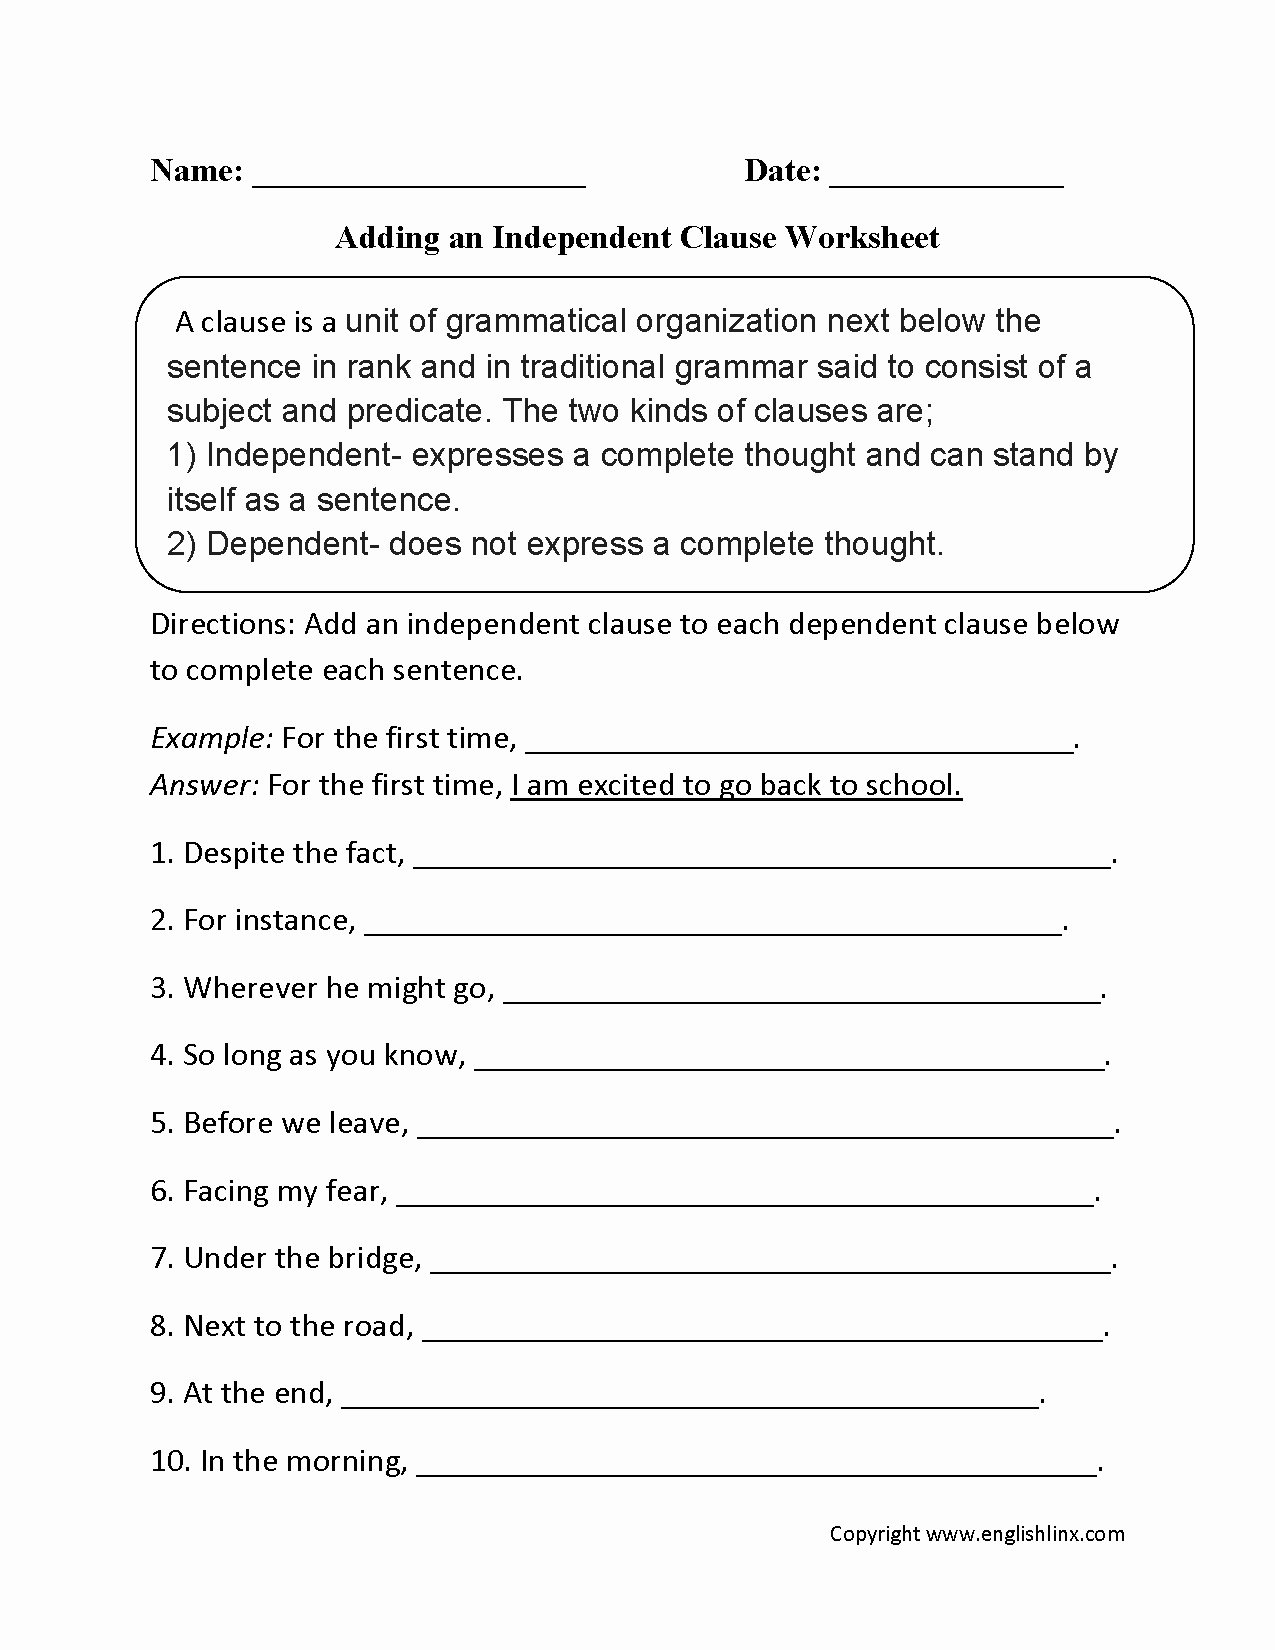 Independent and Dependent Clauses Worksheet New Adding An Independent Clause Worksheet